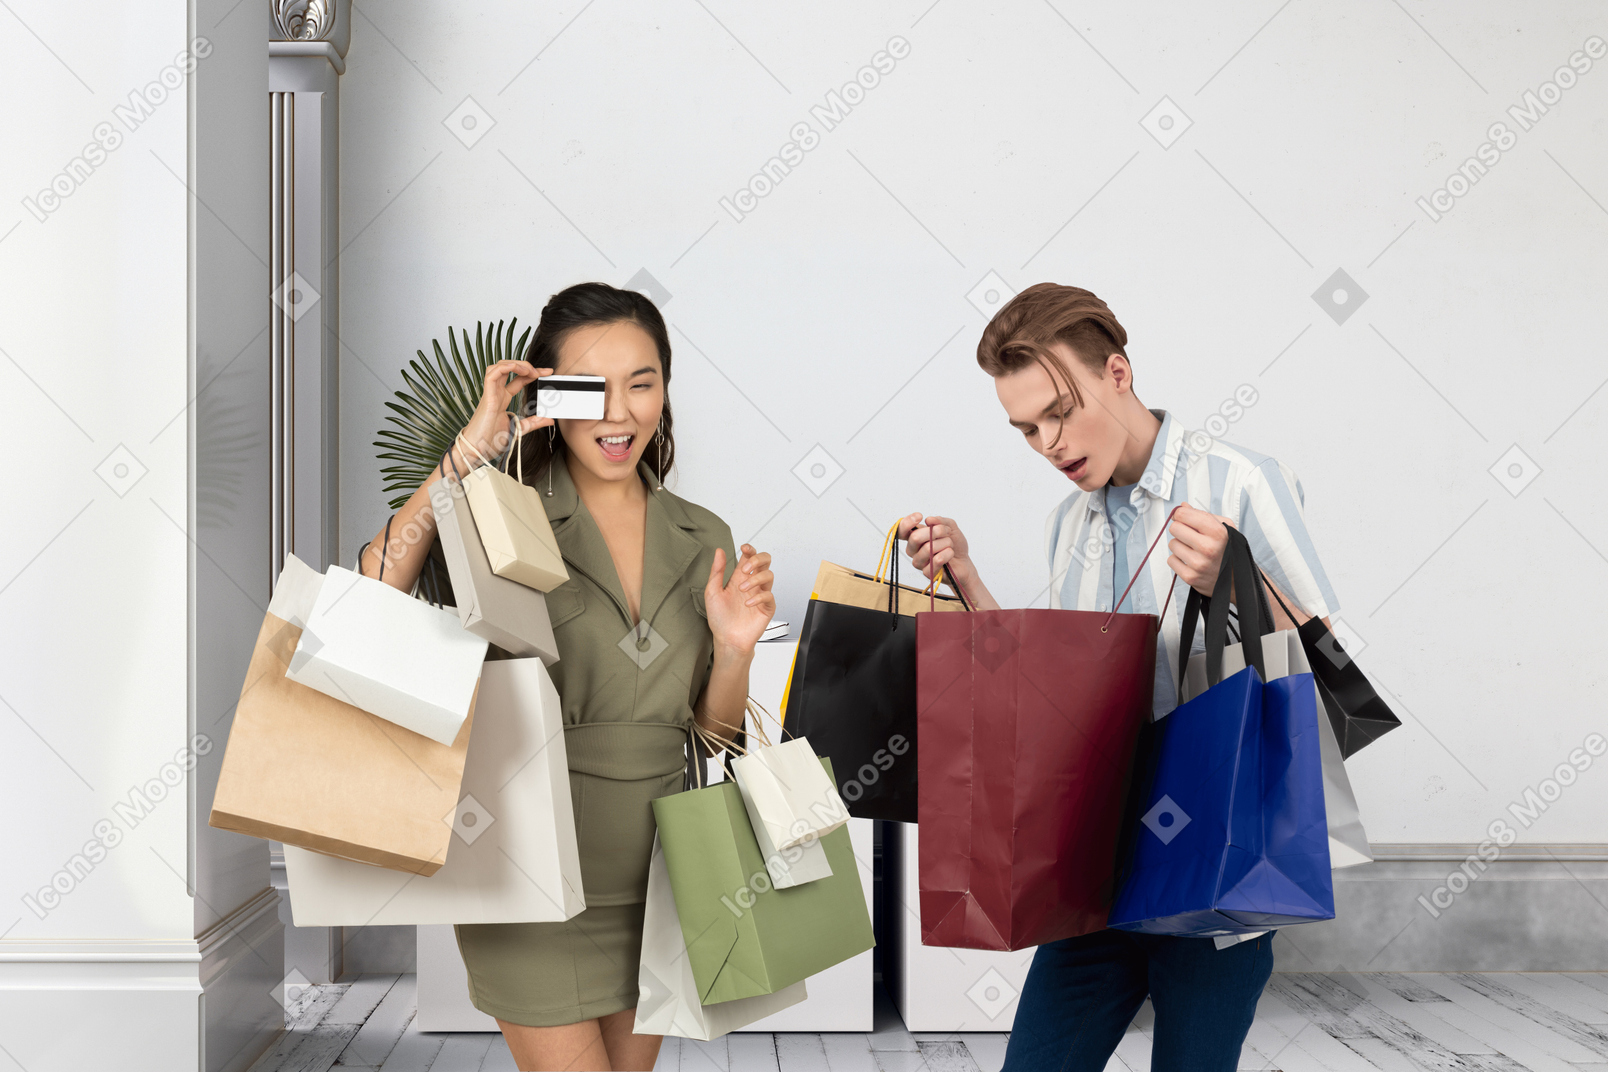 Guy helping girl with shopping bags